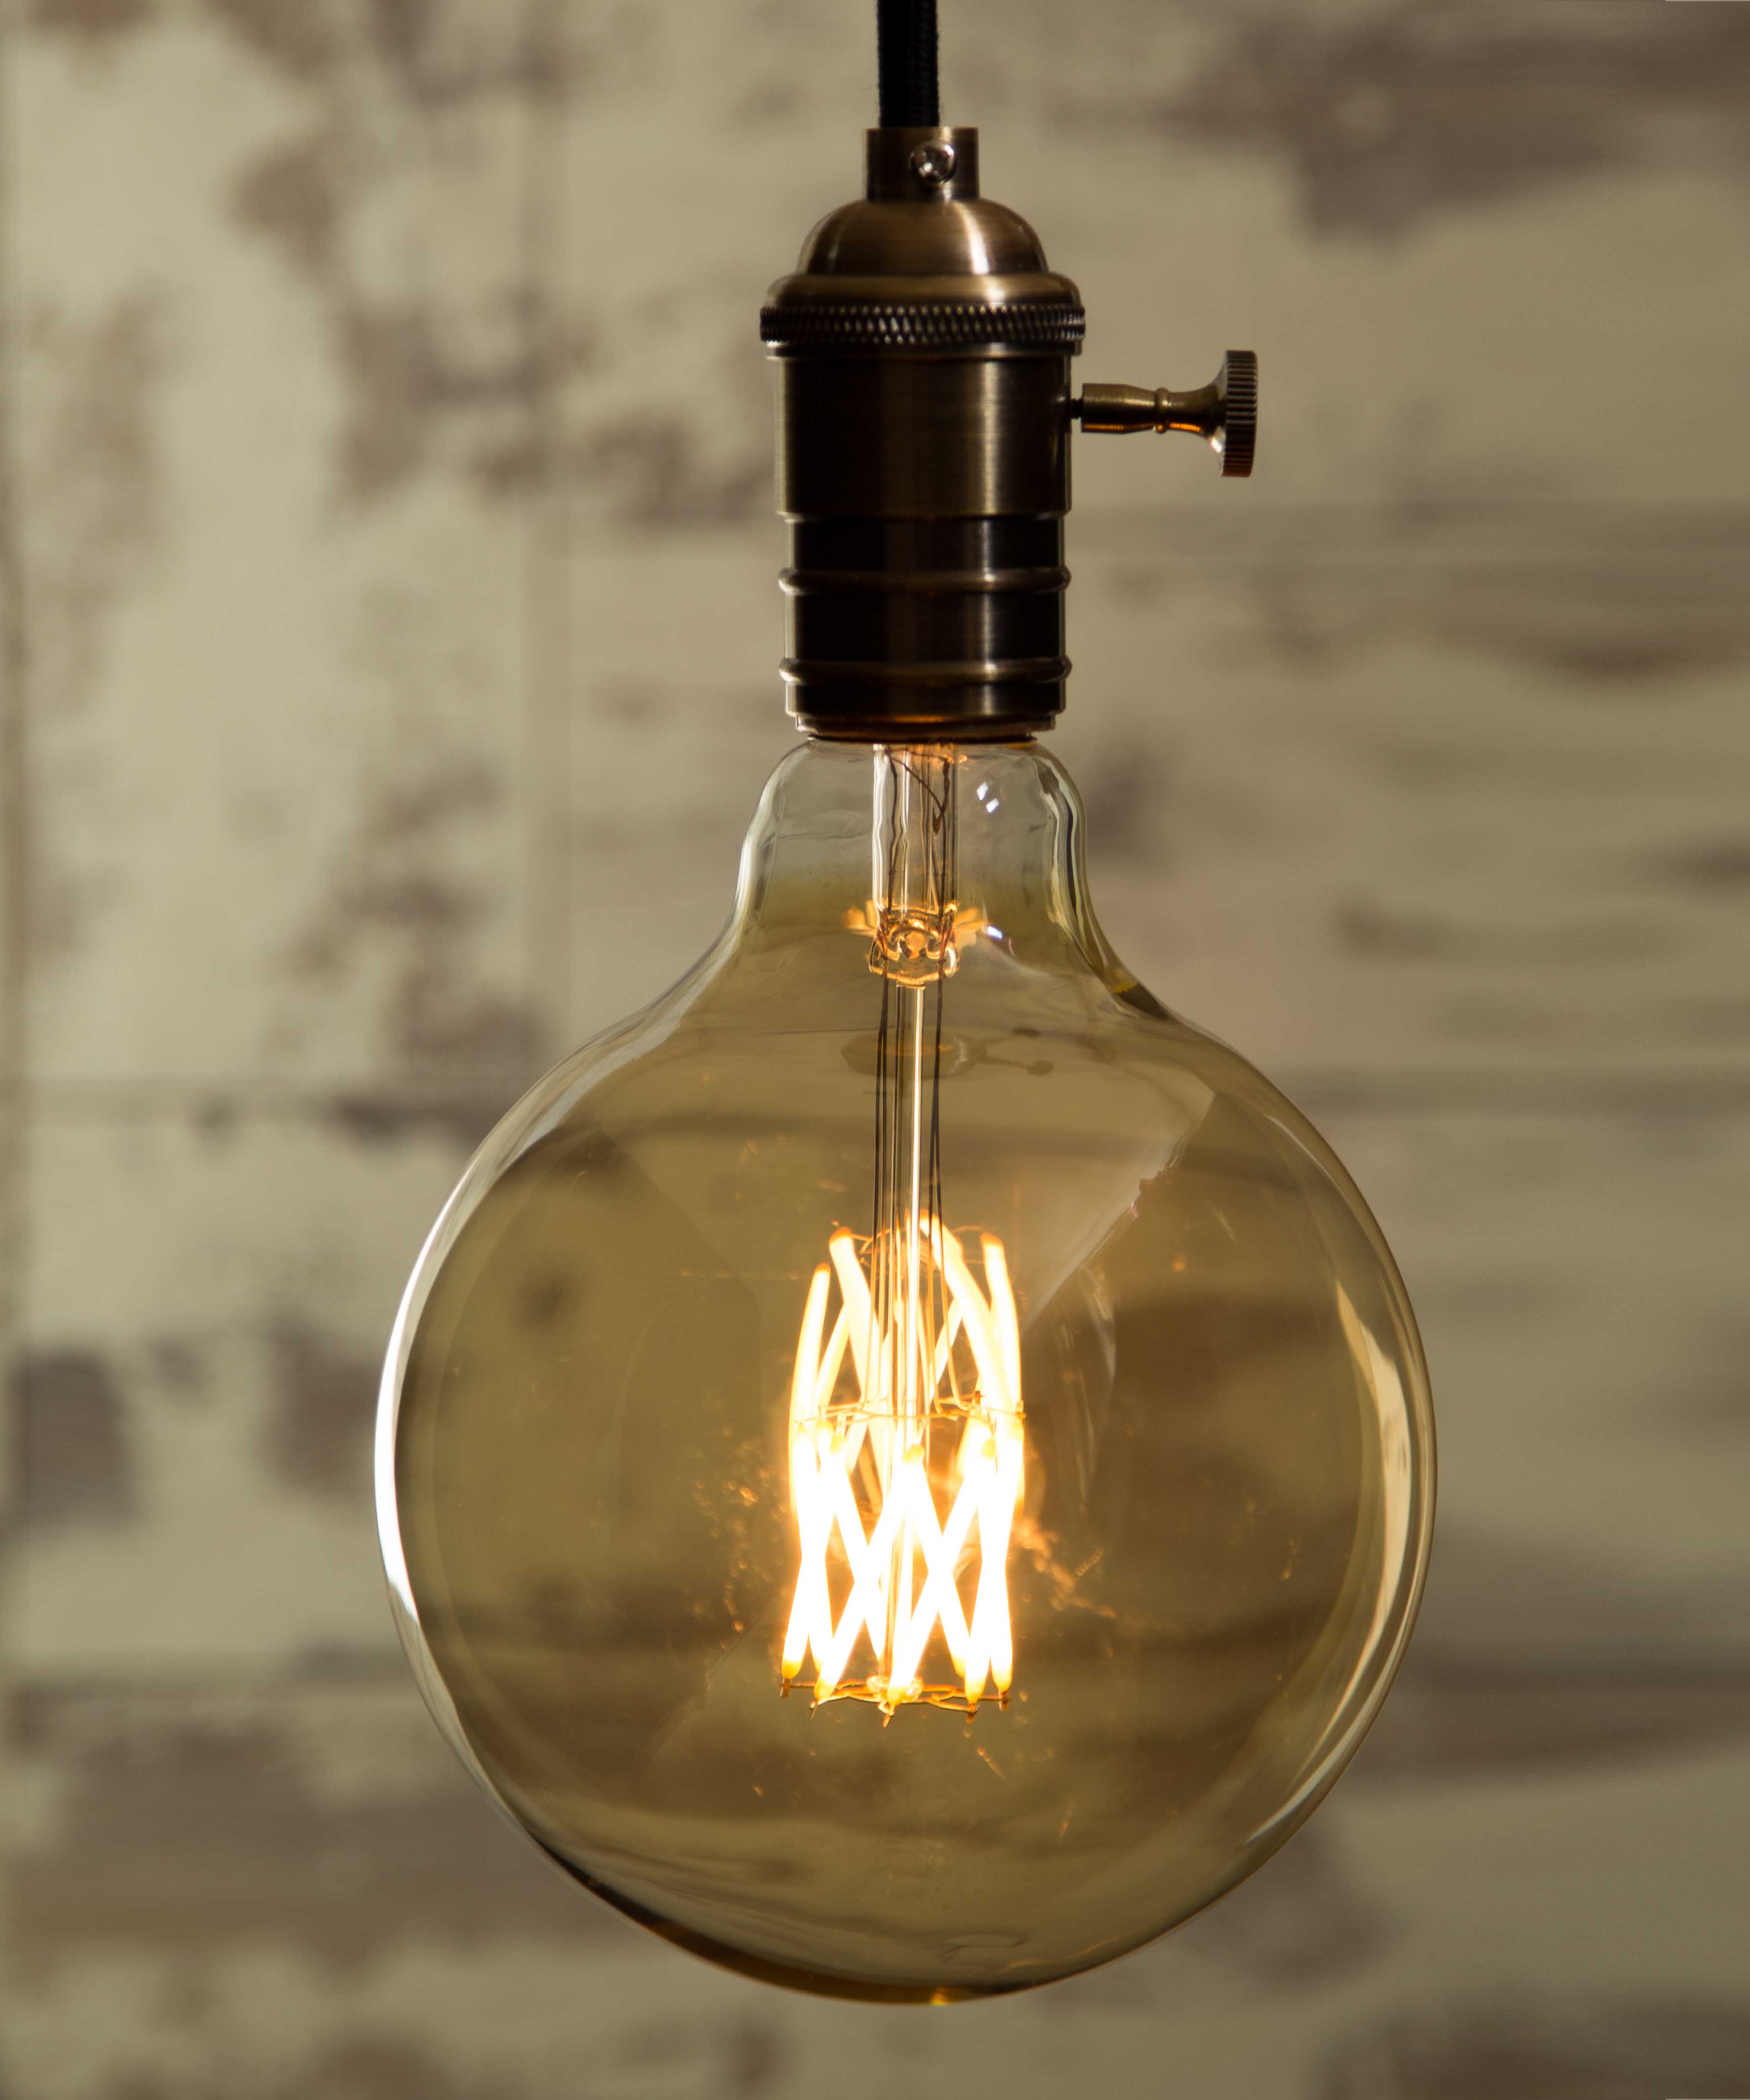 led-g125-8l-william-and-watson-vintage-edison-bulbs-industrial-light